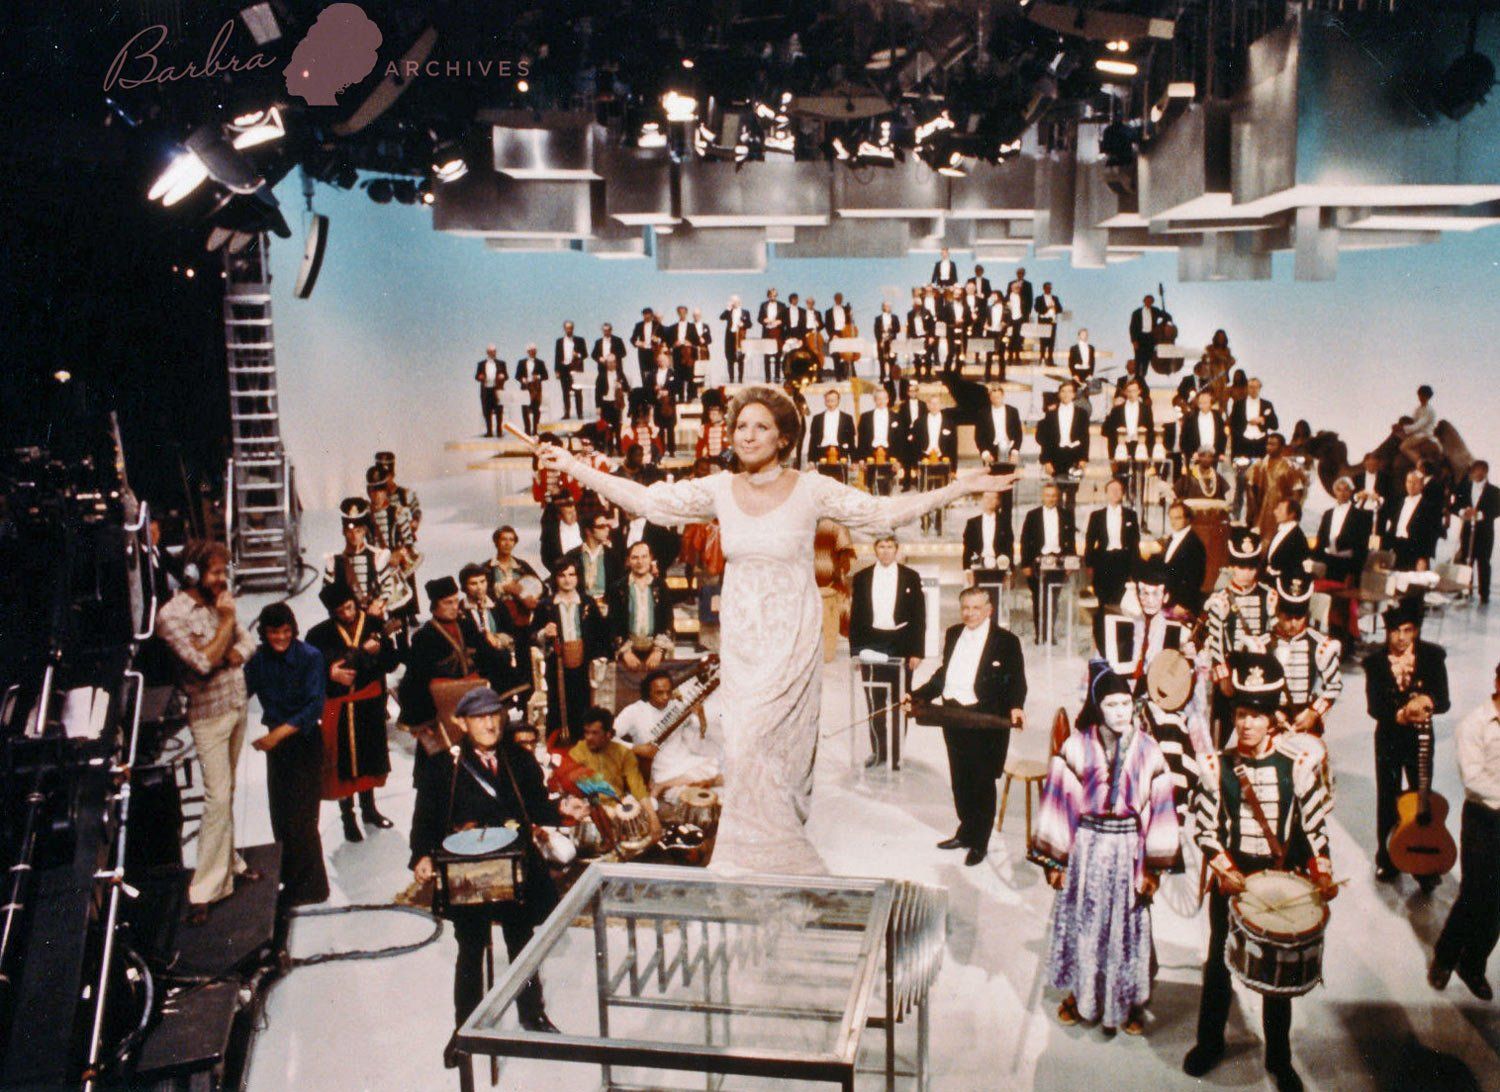 Full photograph of Streisand and musicians and crew, which was used for the cover shot.